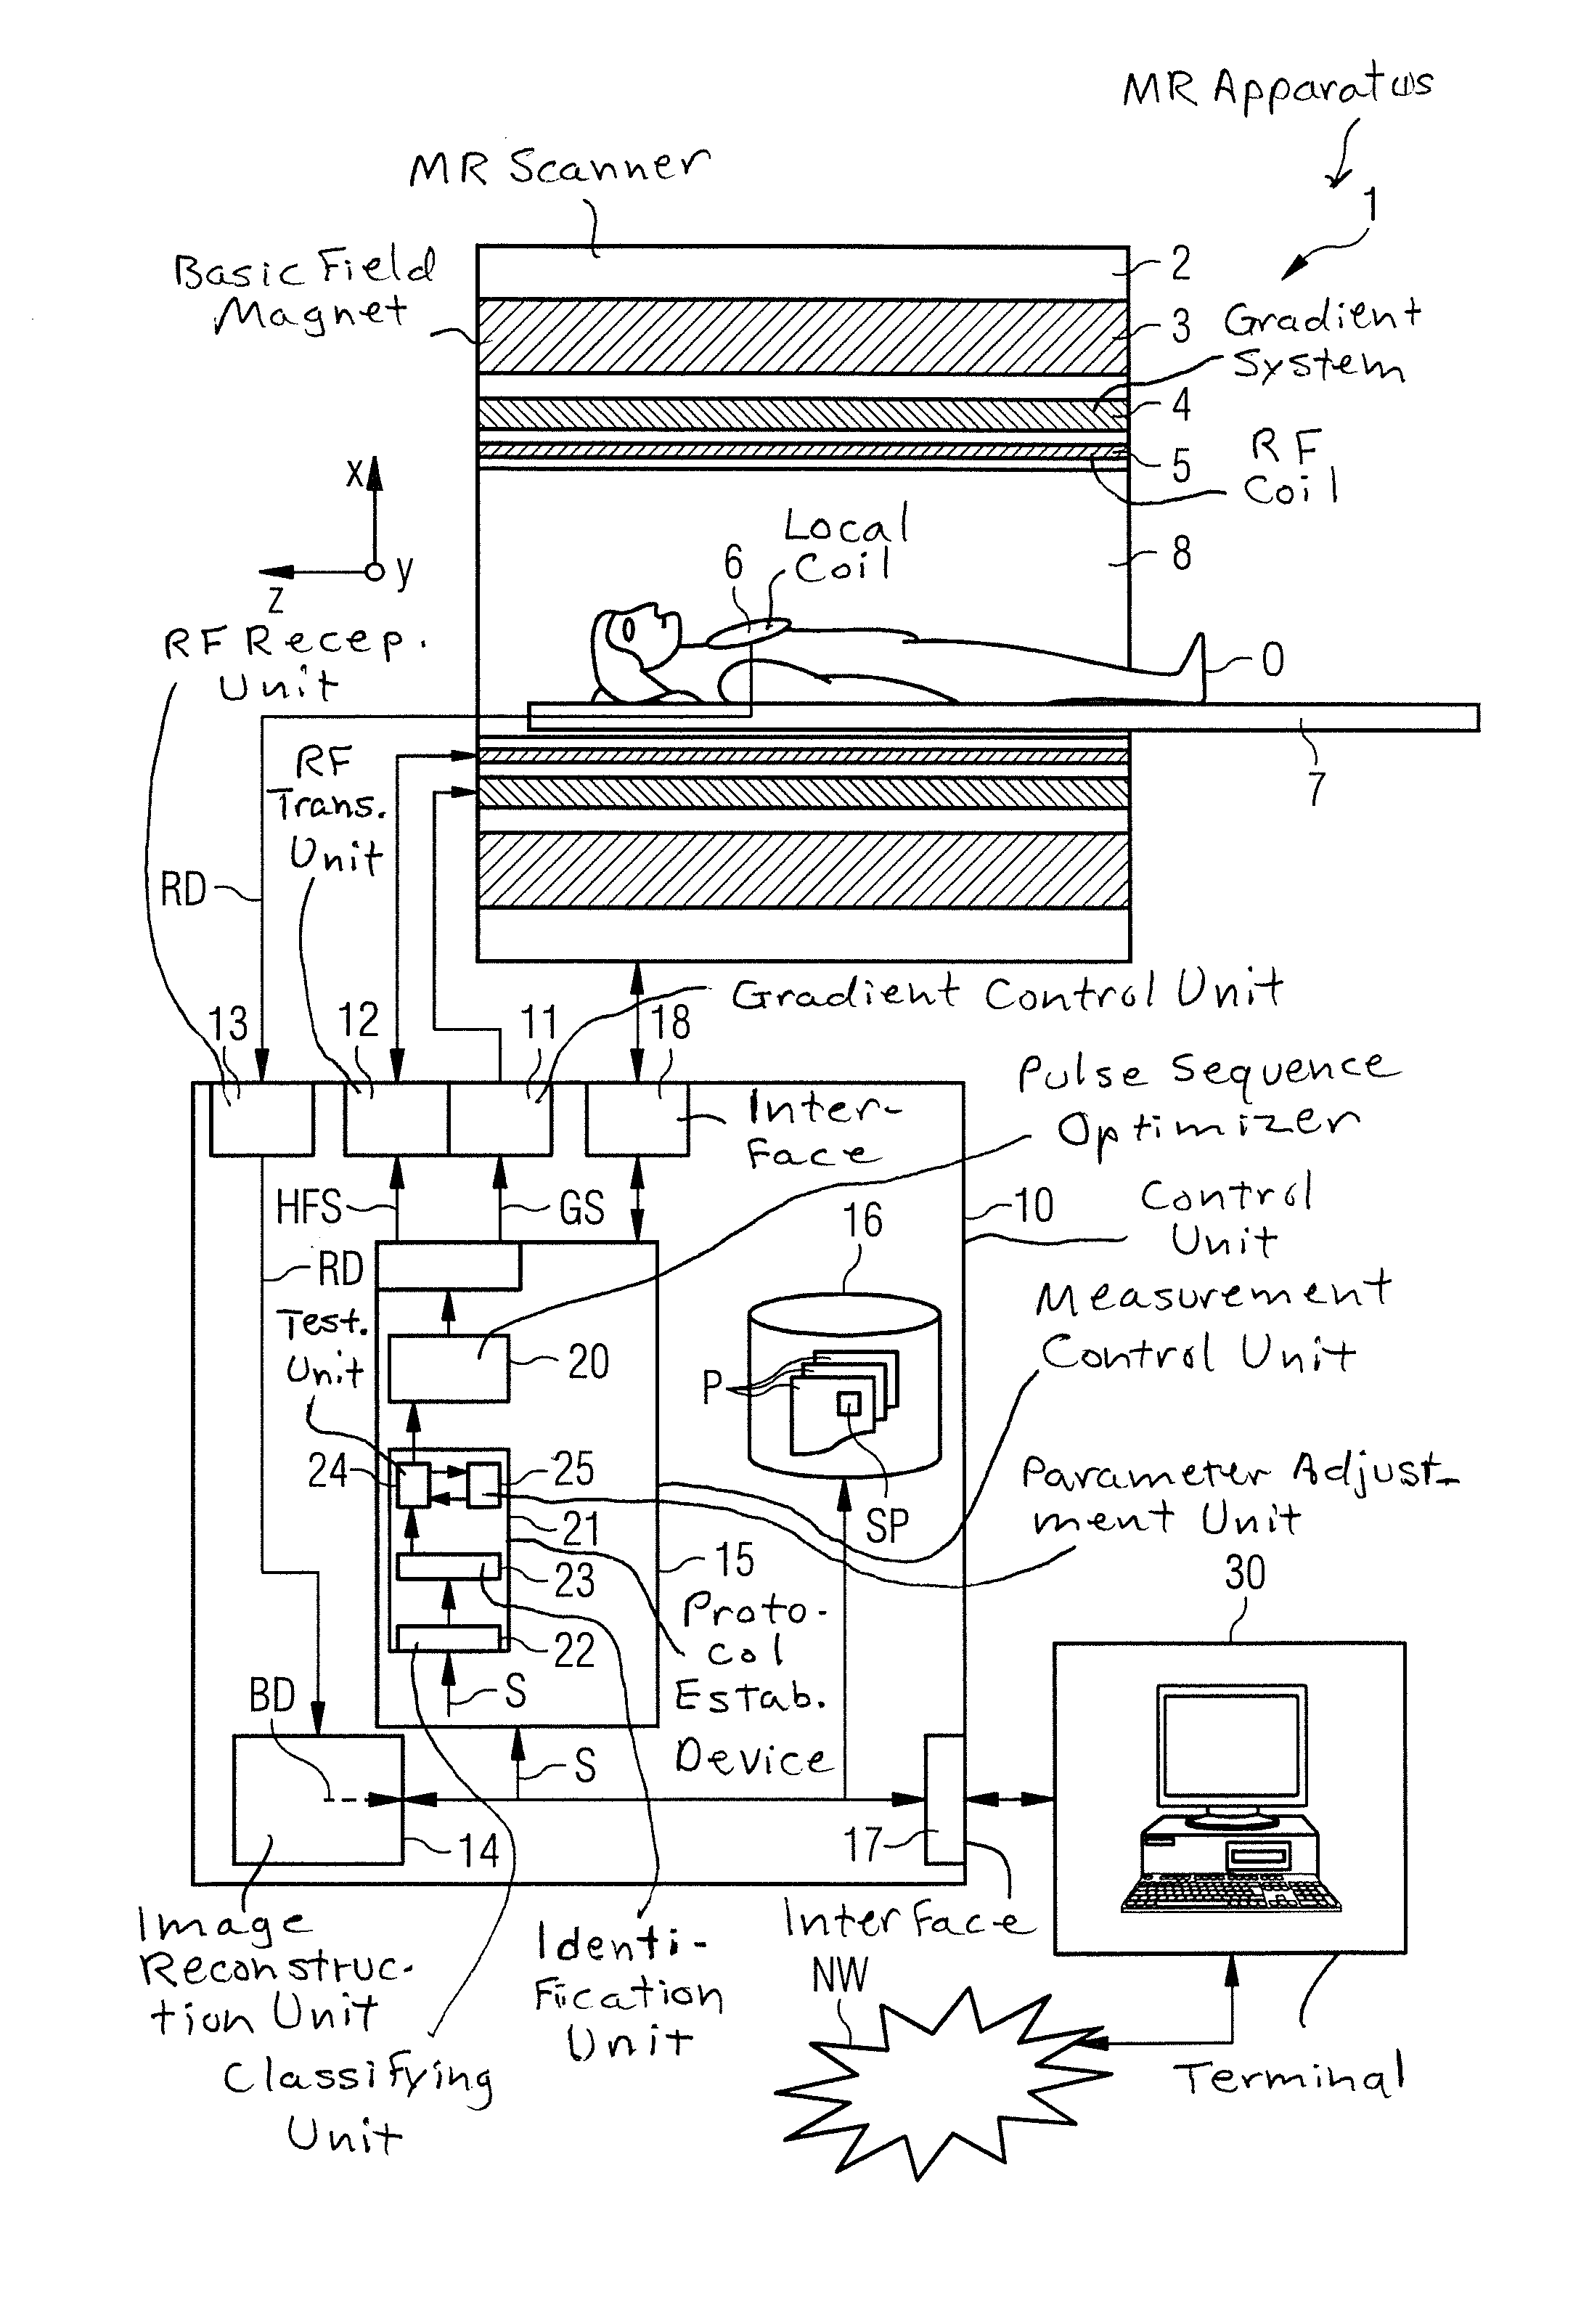 Method and device for optimizing magnetic resonance system operating sequences with respect to physiological limiting values